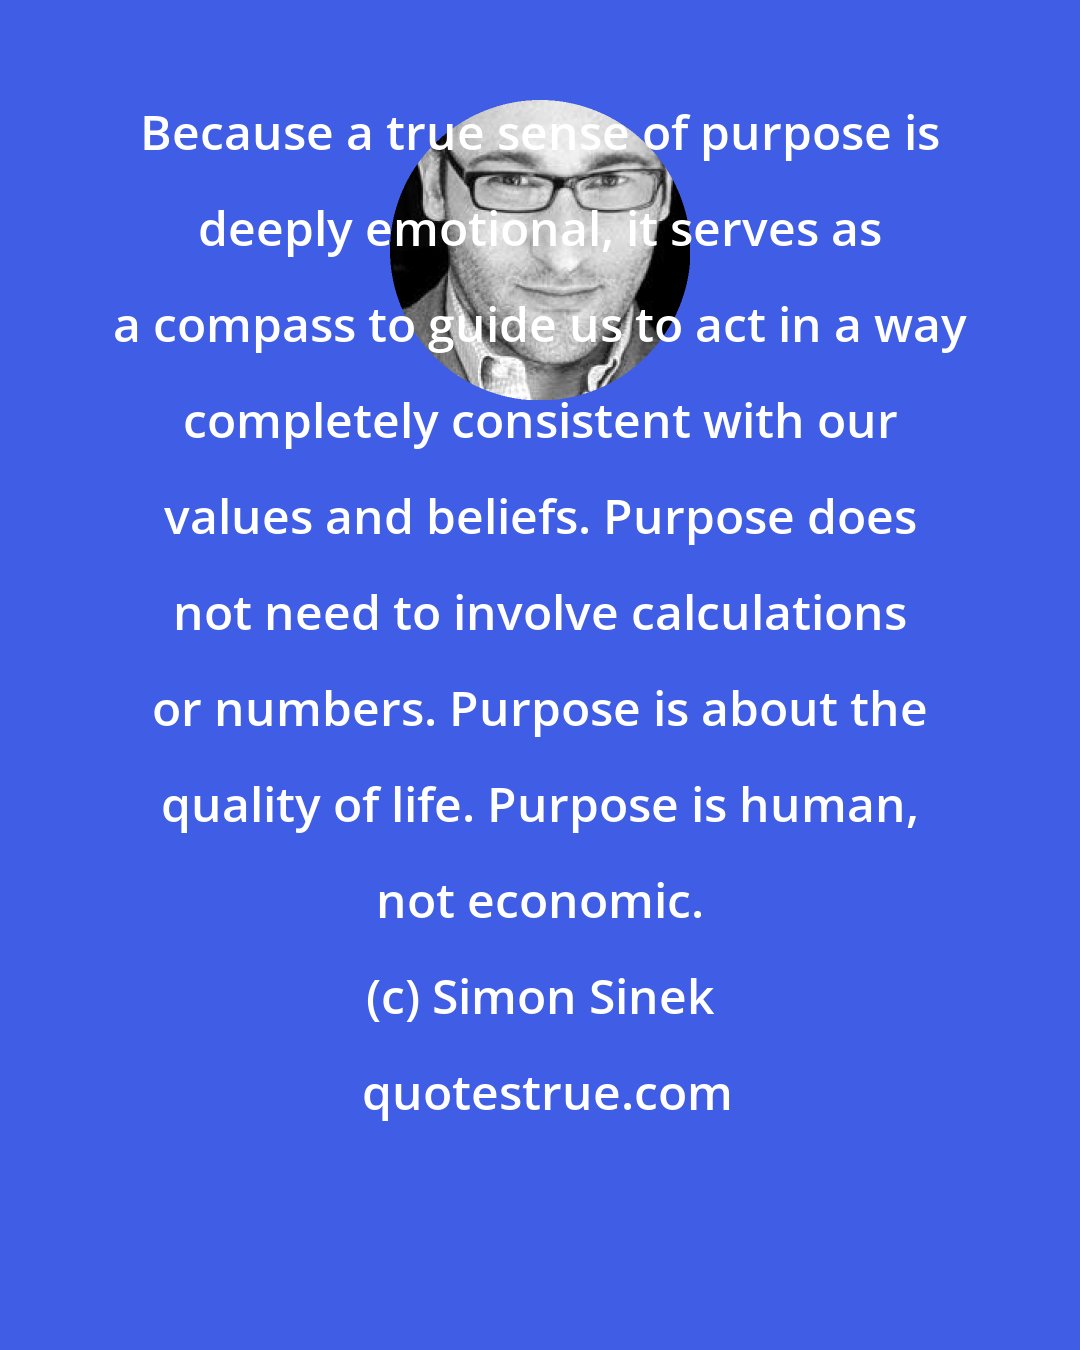 Simon Sinek: Because a true sense of purpose is deeply emotional, it serves as a compass to guide us to act in a way completely consistent with our values and beliefs. Purpose does not need to involve calculations or numbers. Purpose is about the quality of life. Purpose is human, not economic.